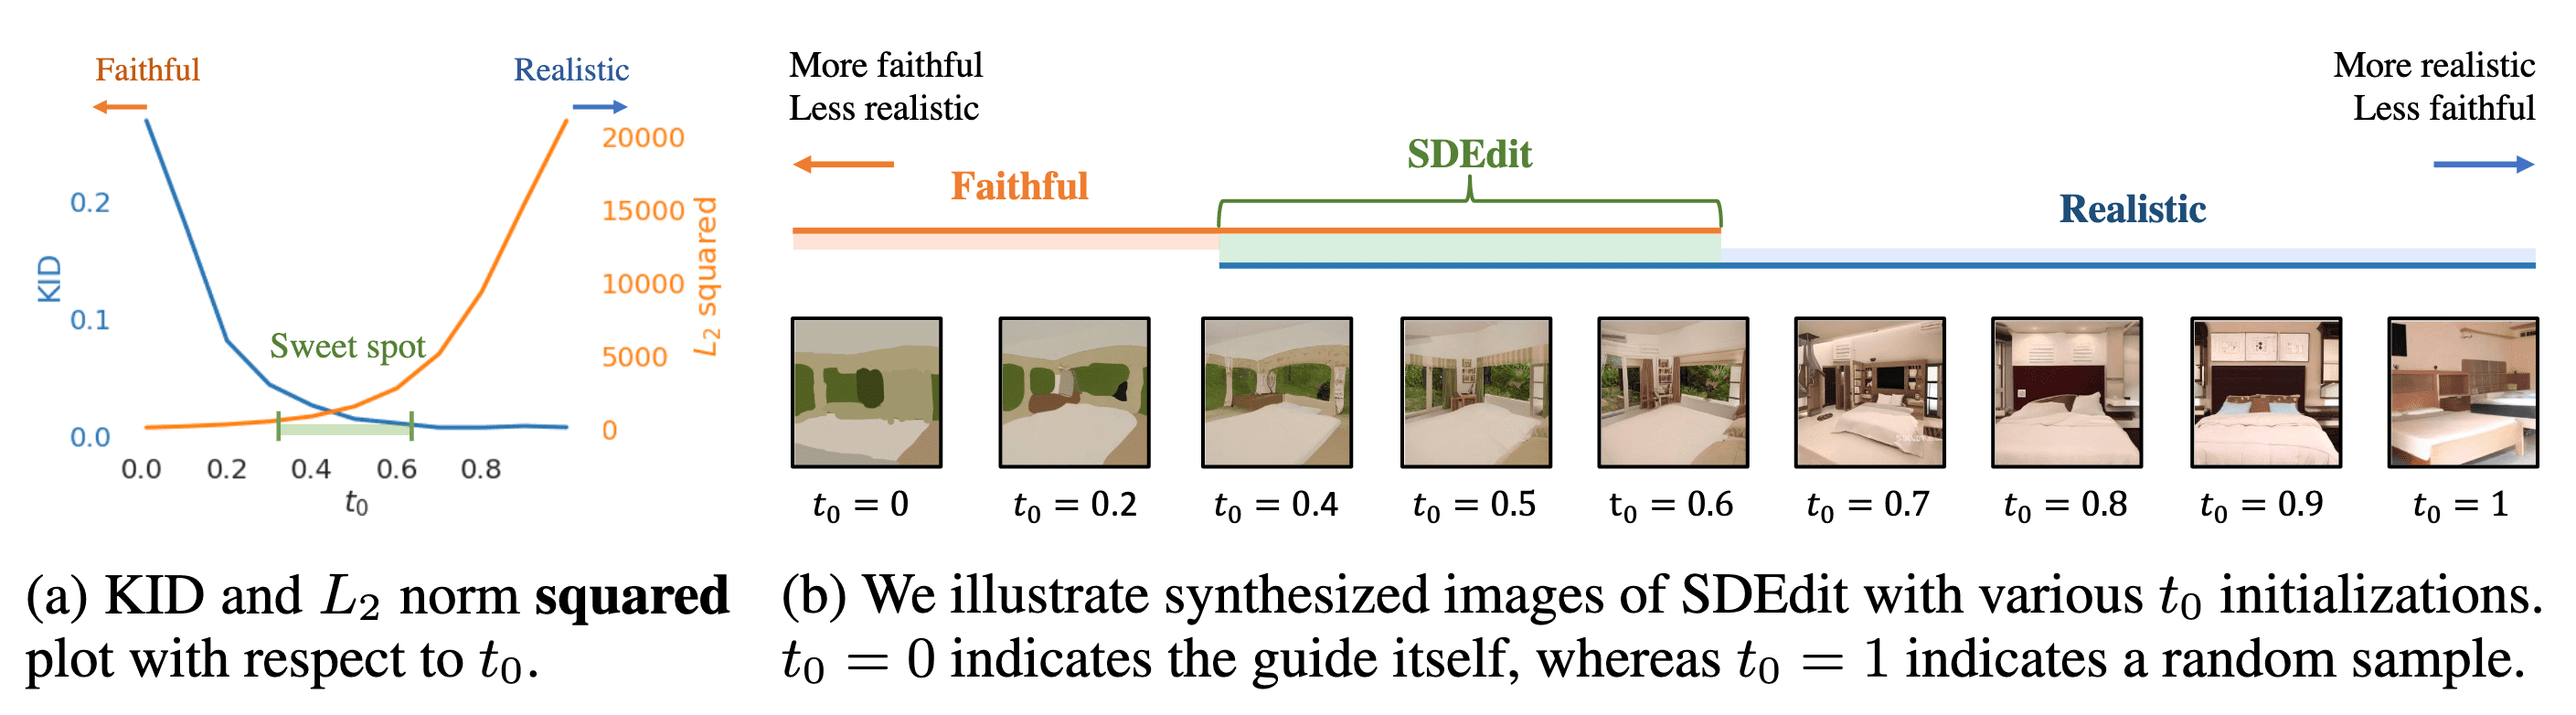 Trade-off between faithfulness and realism for SDEdit.